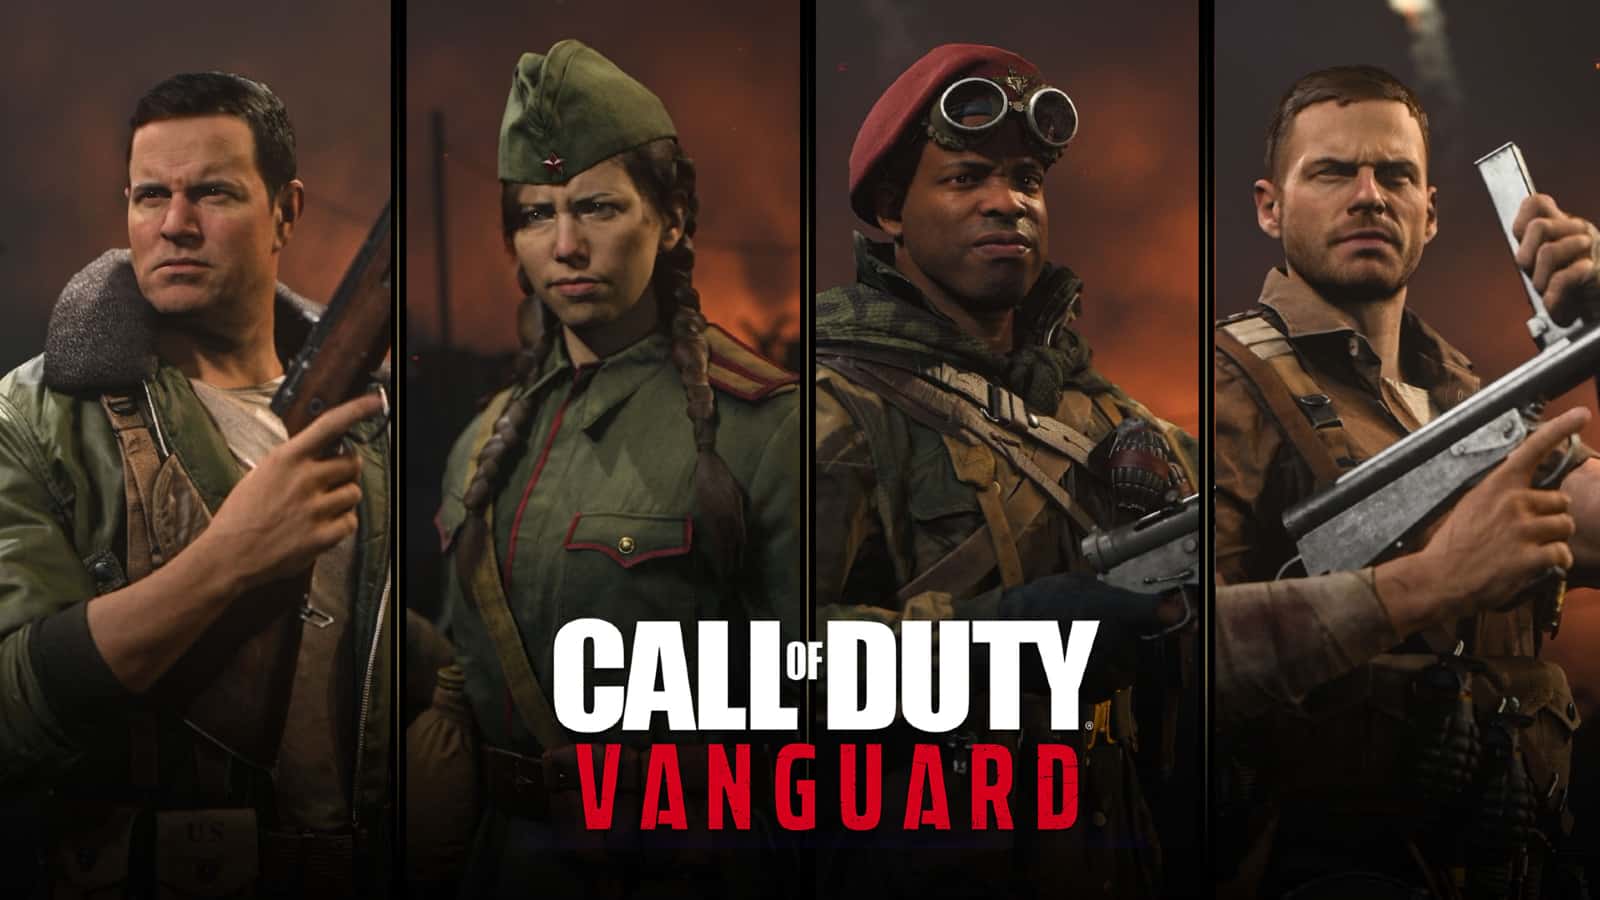 Call of Duty Vanguard Campaign trailer reveals characters, missions, more